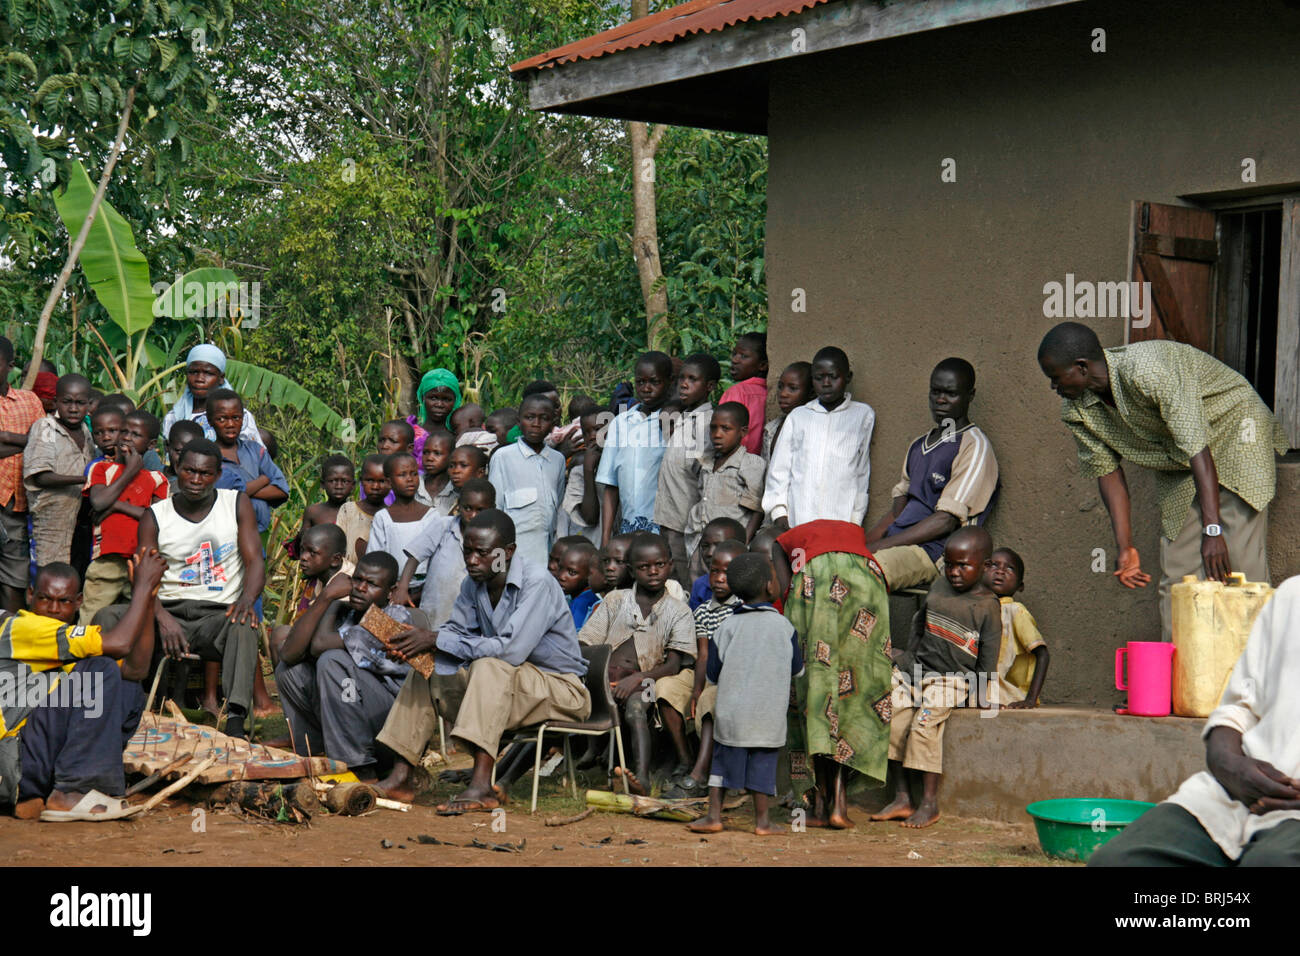 People gathered in a village at an introduction ceremony (kwanjula) in Uganda. Stock Photo